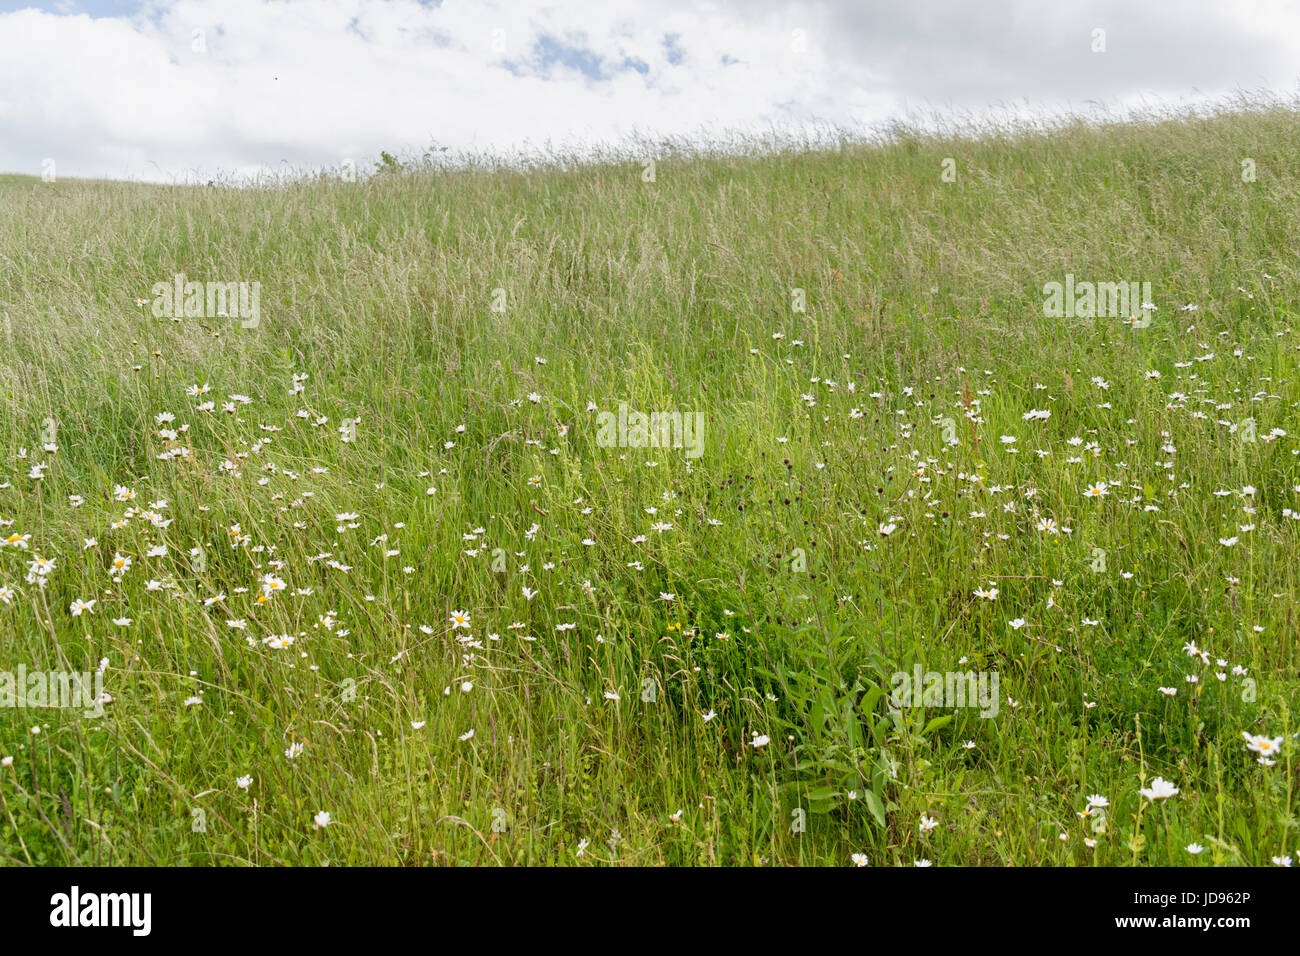 Wild meadow sown with wildflowers Stock Photo